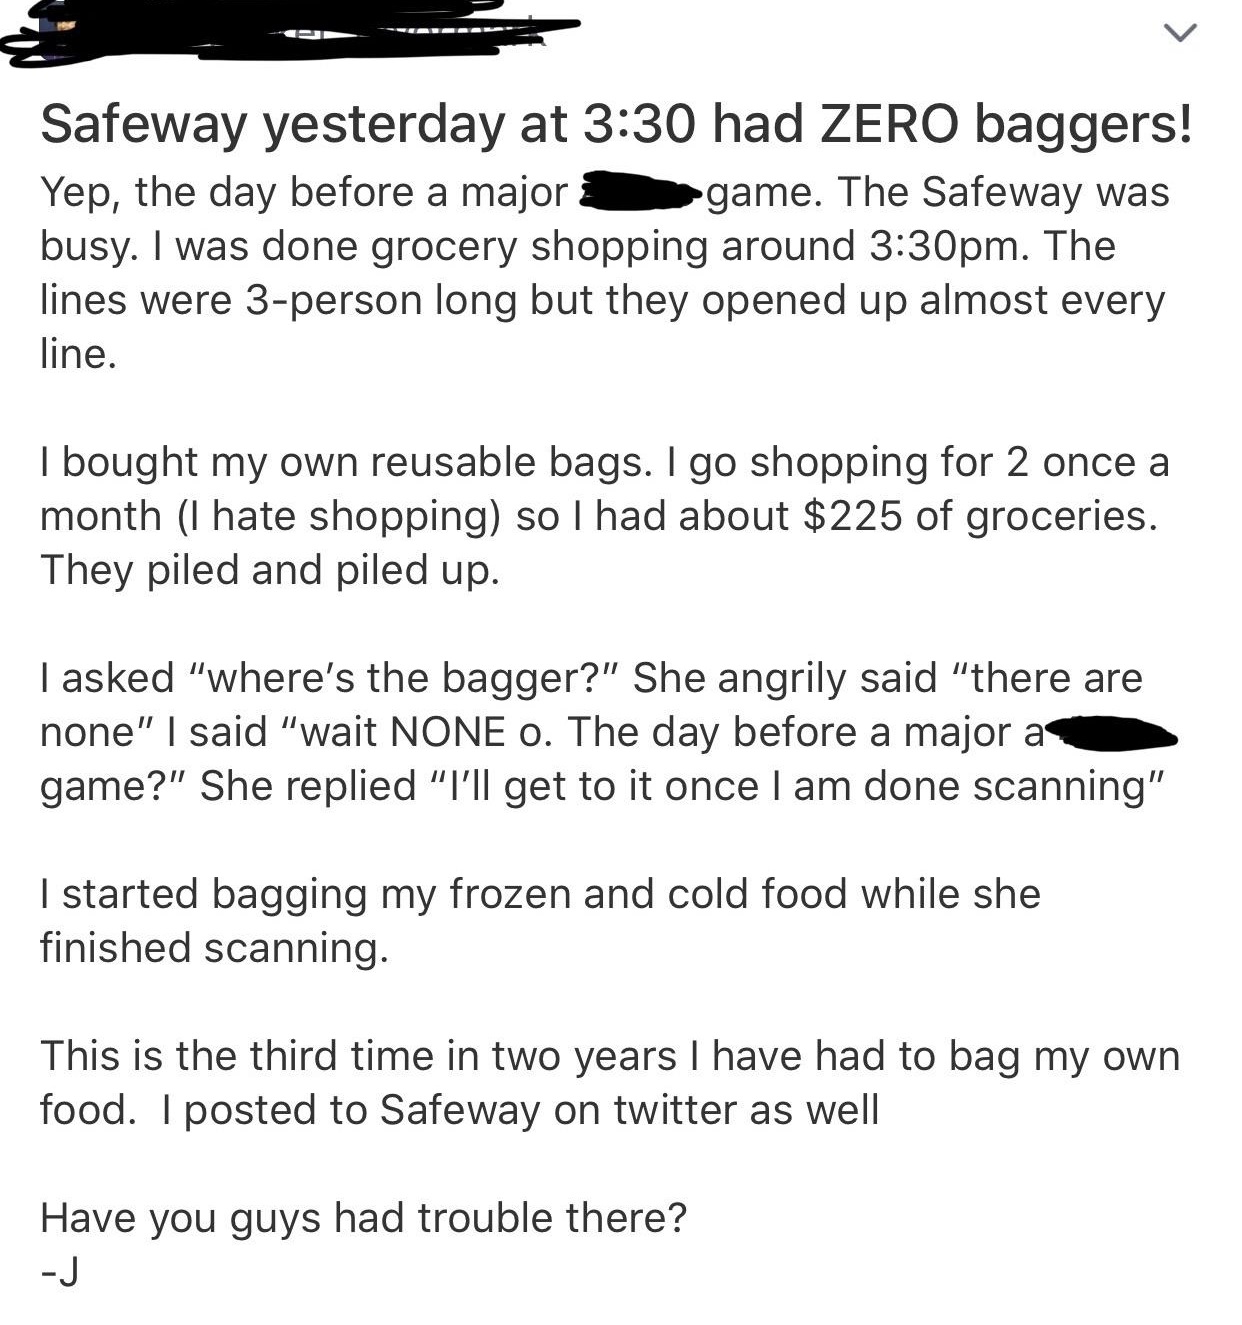 angle - Safeway yesterday at had Zero baggers! Yep, the day before a major game. The Safeway was busy. I was done grocery shopping around pm. The lines were 3person long but they opened up almost every line. I bought my own reusable bags. I go shopping fo